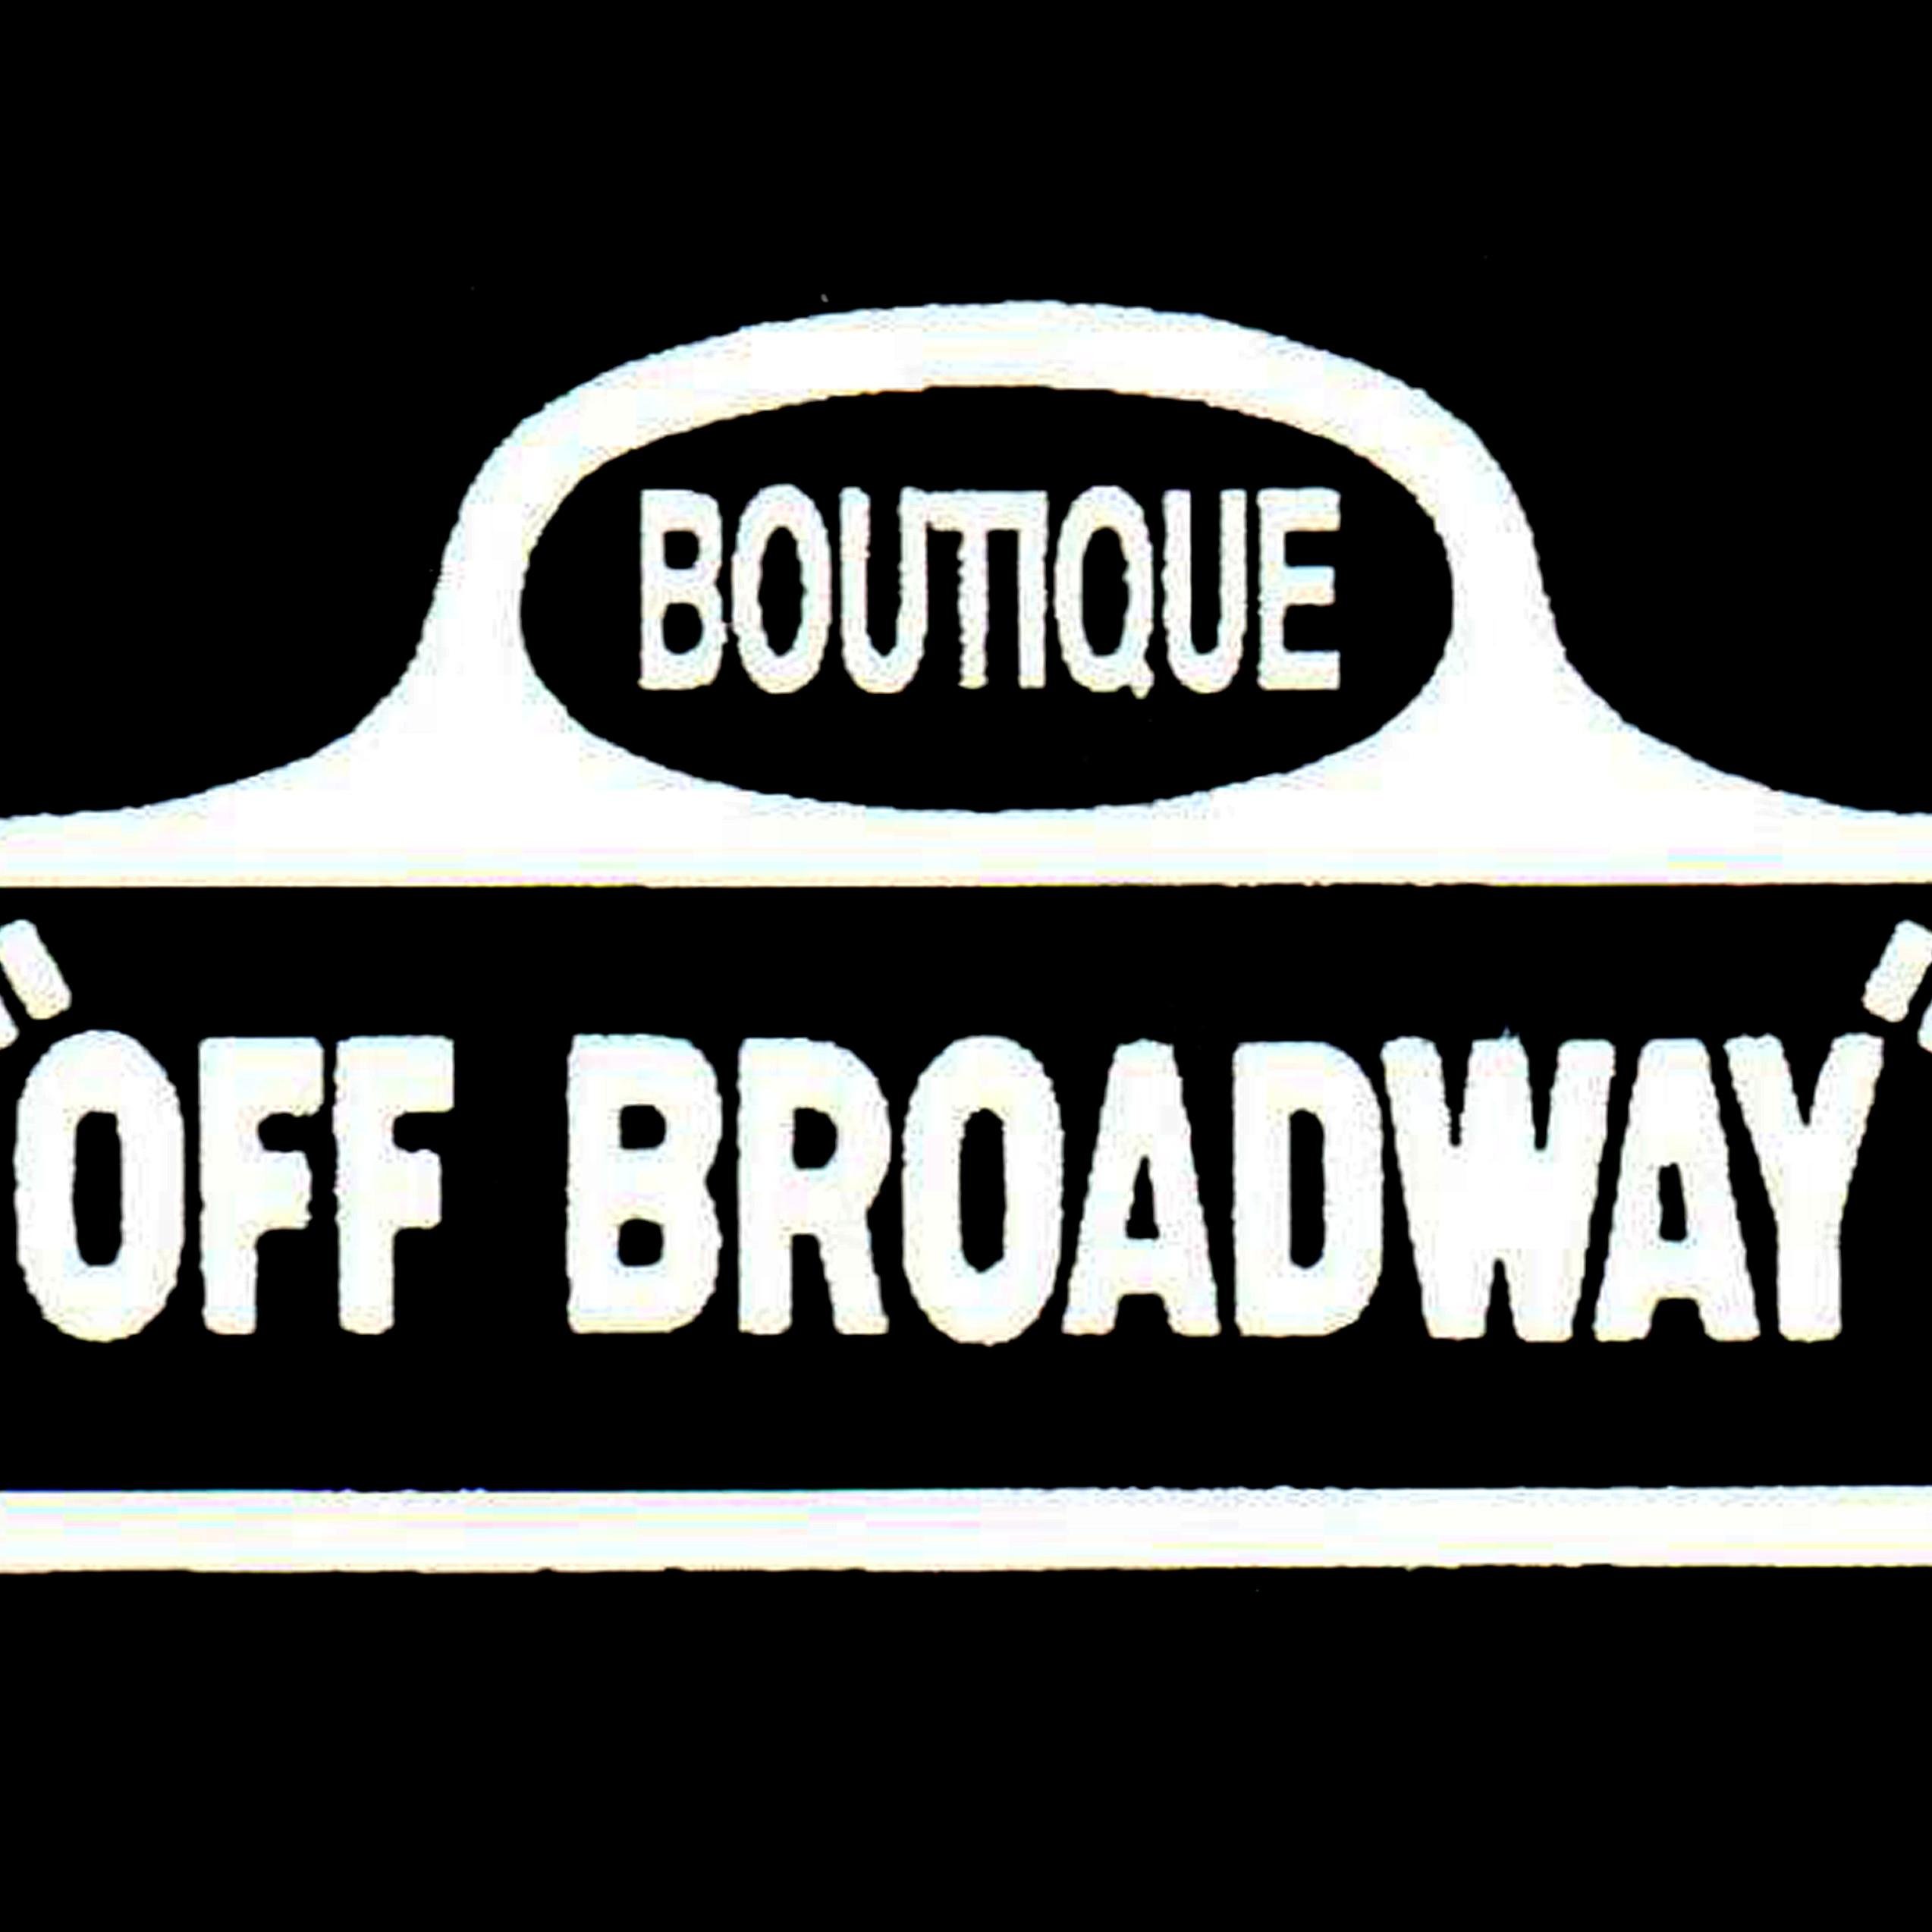 OffBroadwayBoutique